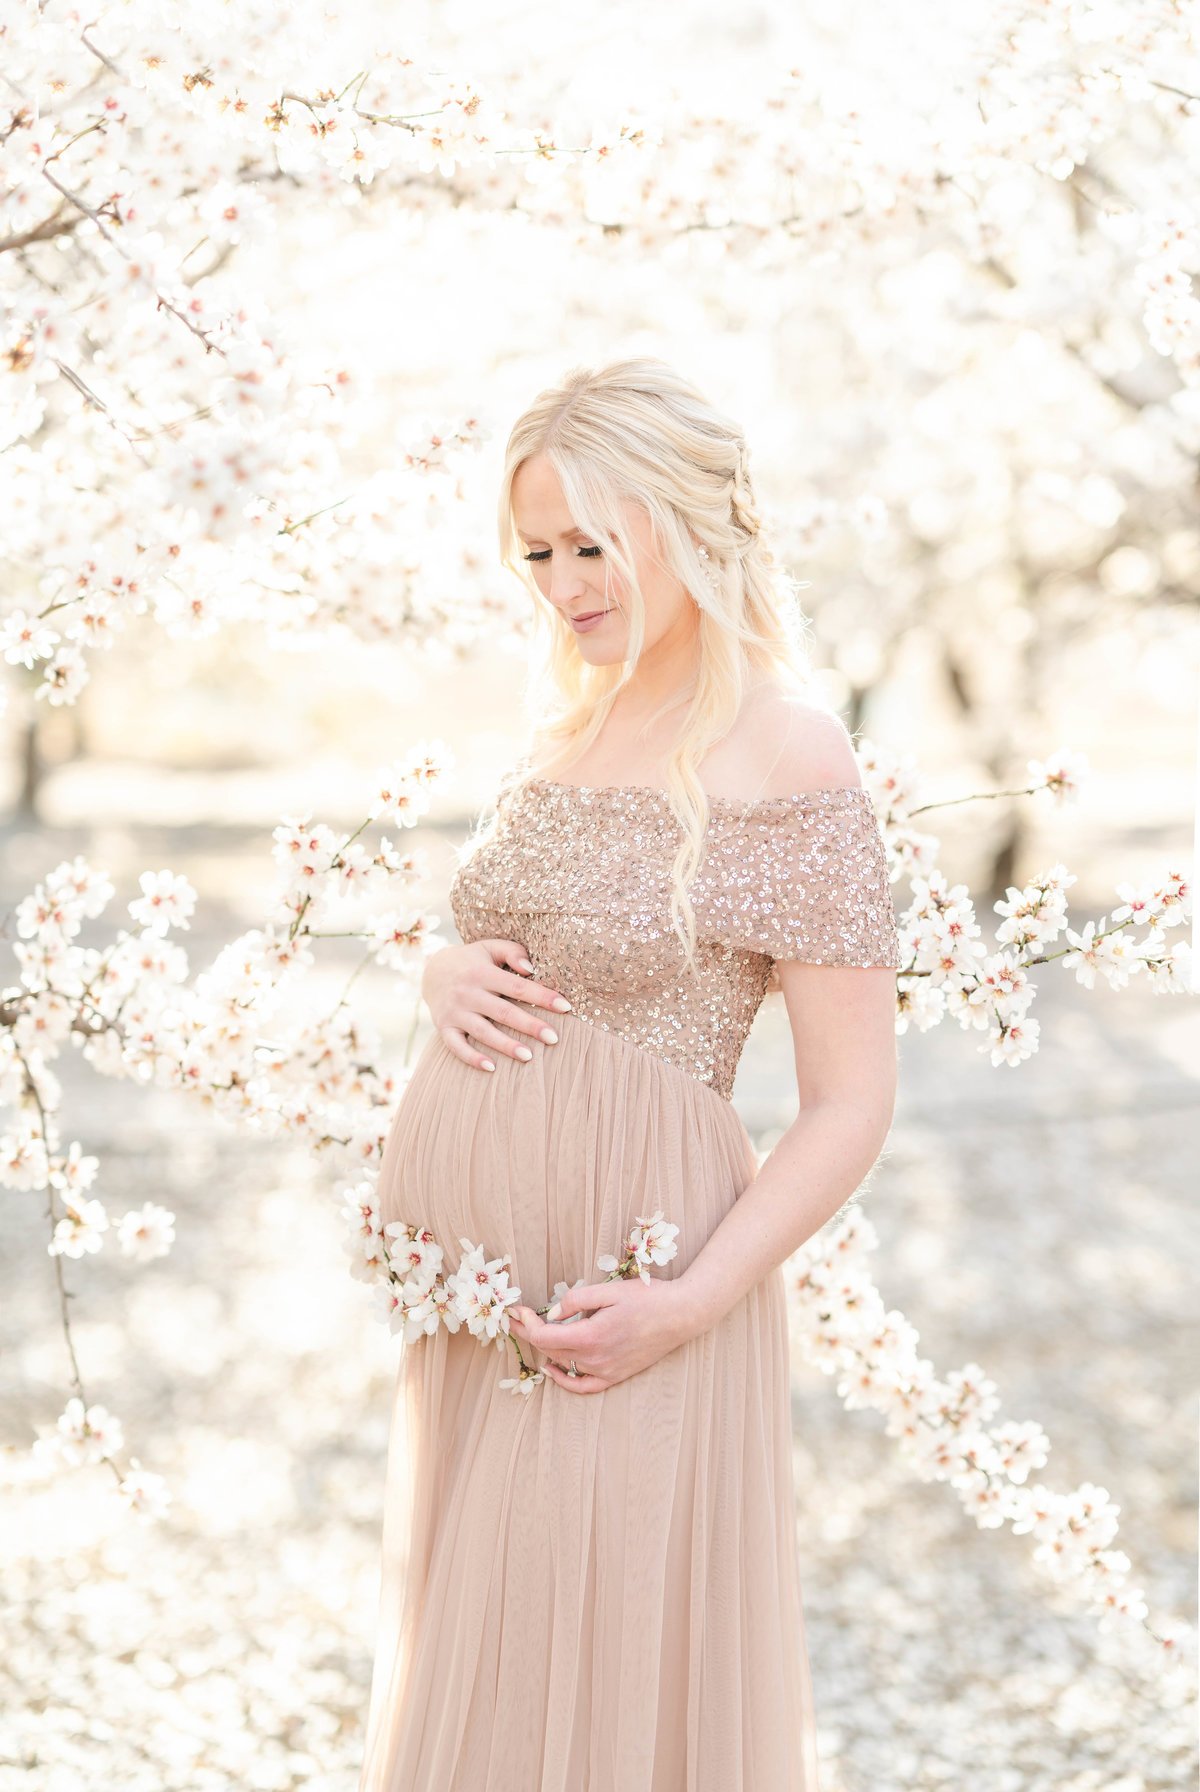 An expecting mother is wearing a dusty rose gown while standing in an almond blossom field caressing her beautiful bump photographed by Bay area photographer, Light Livin Photography.